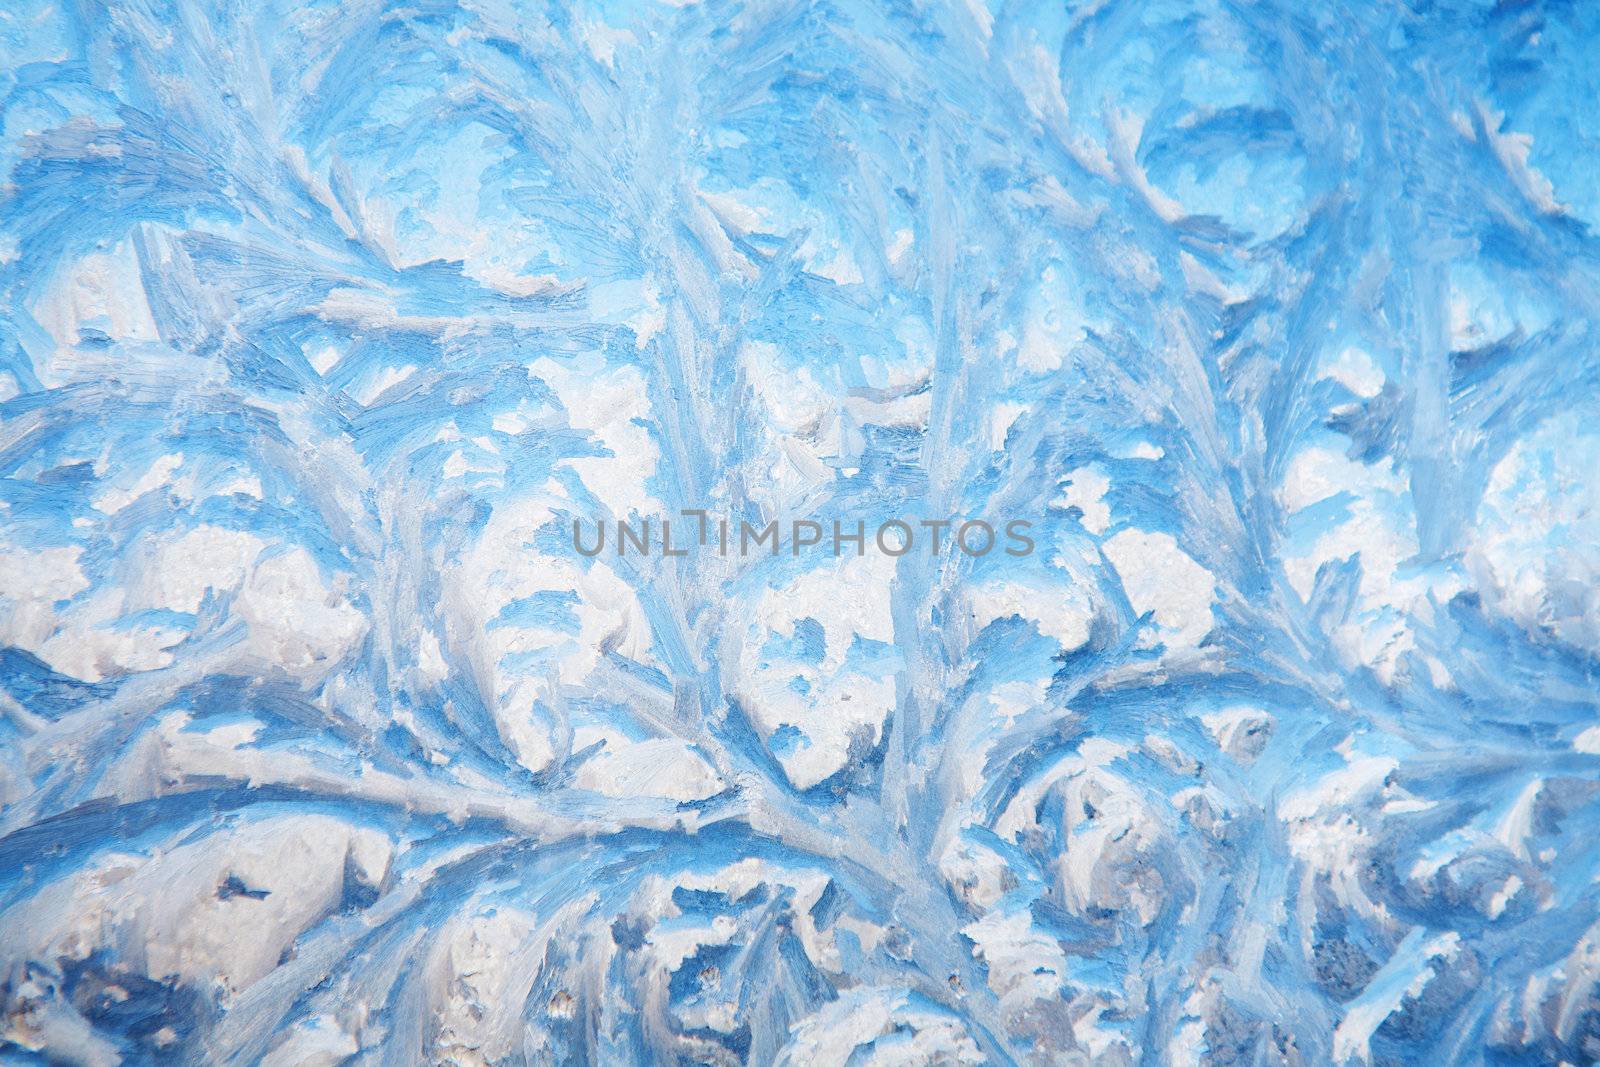 painting on the frozen window by frost - nobody